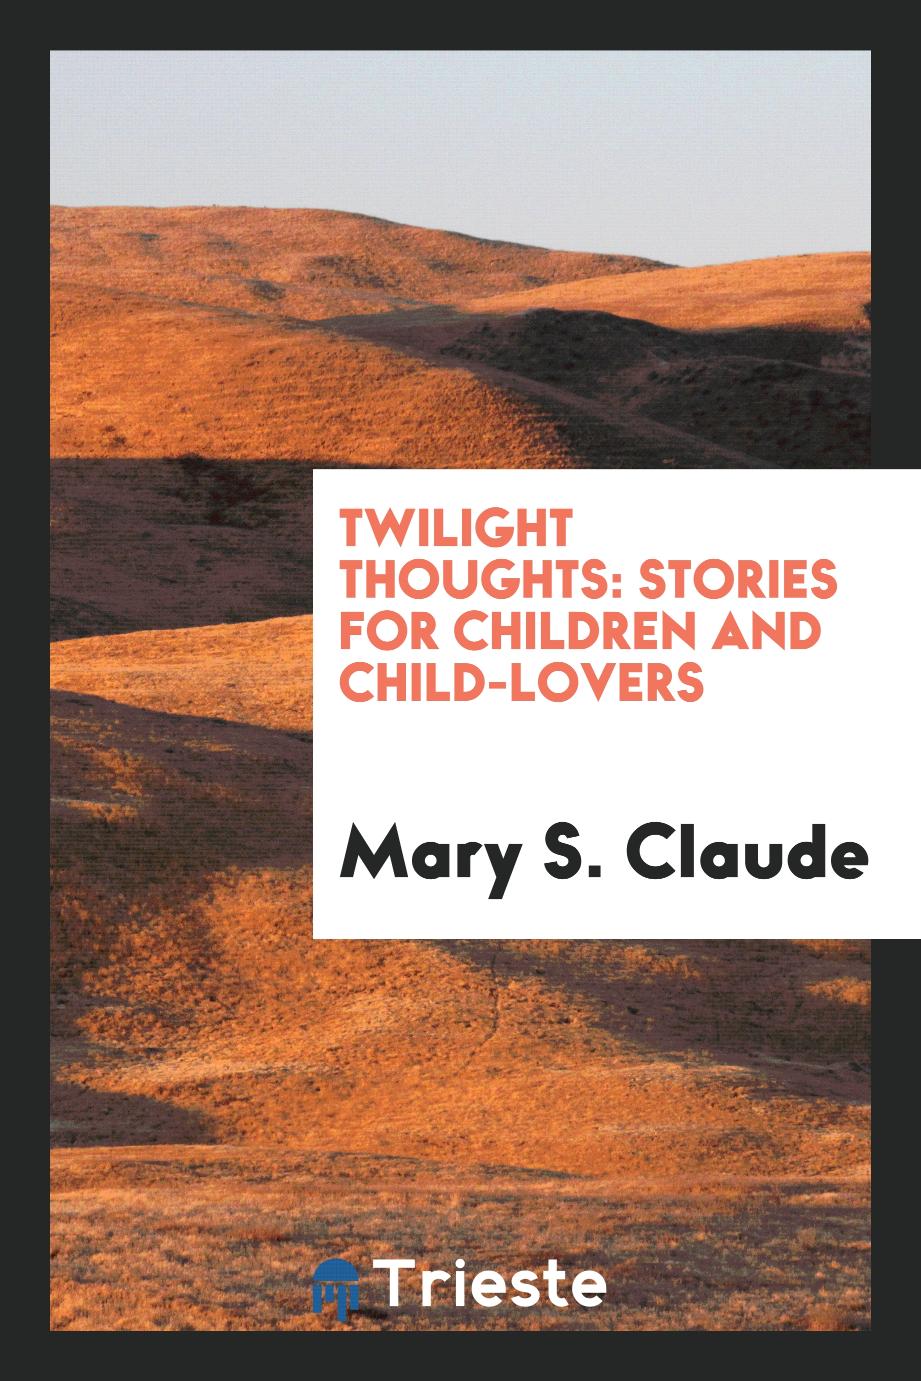 Twilight Thoughts: Stories for Children and Child-Lovers